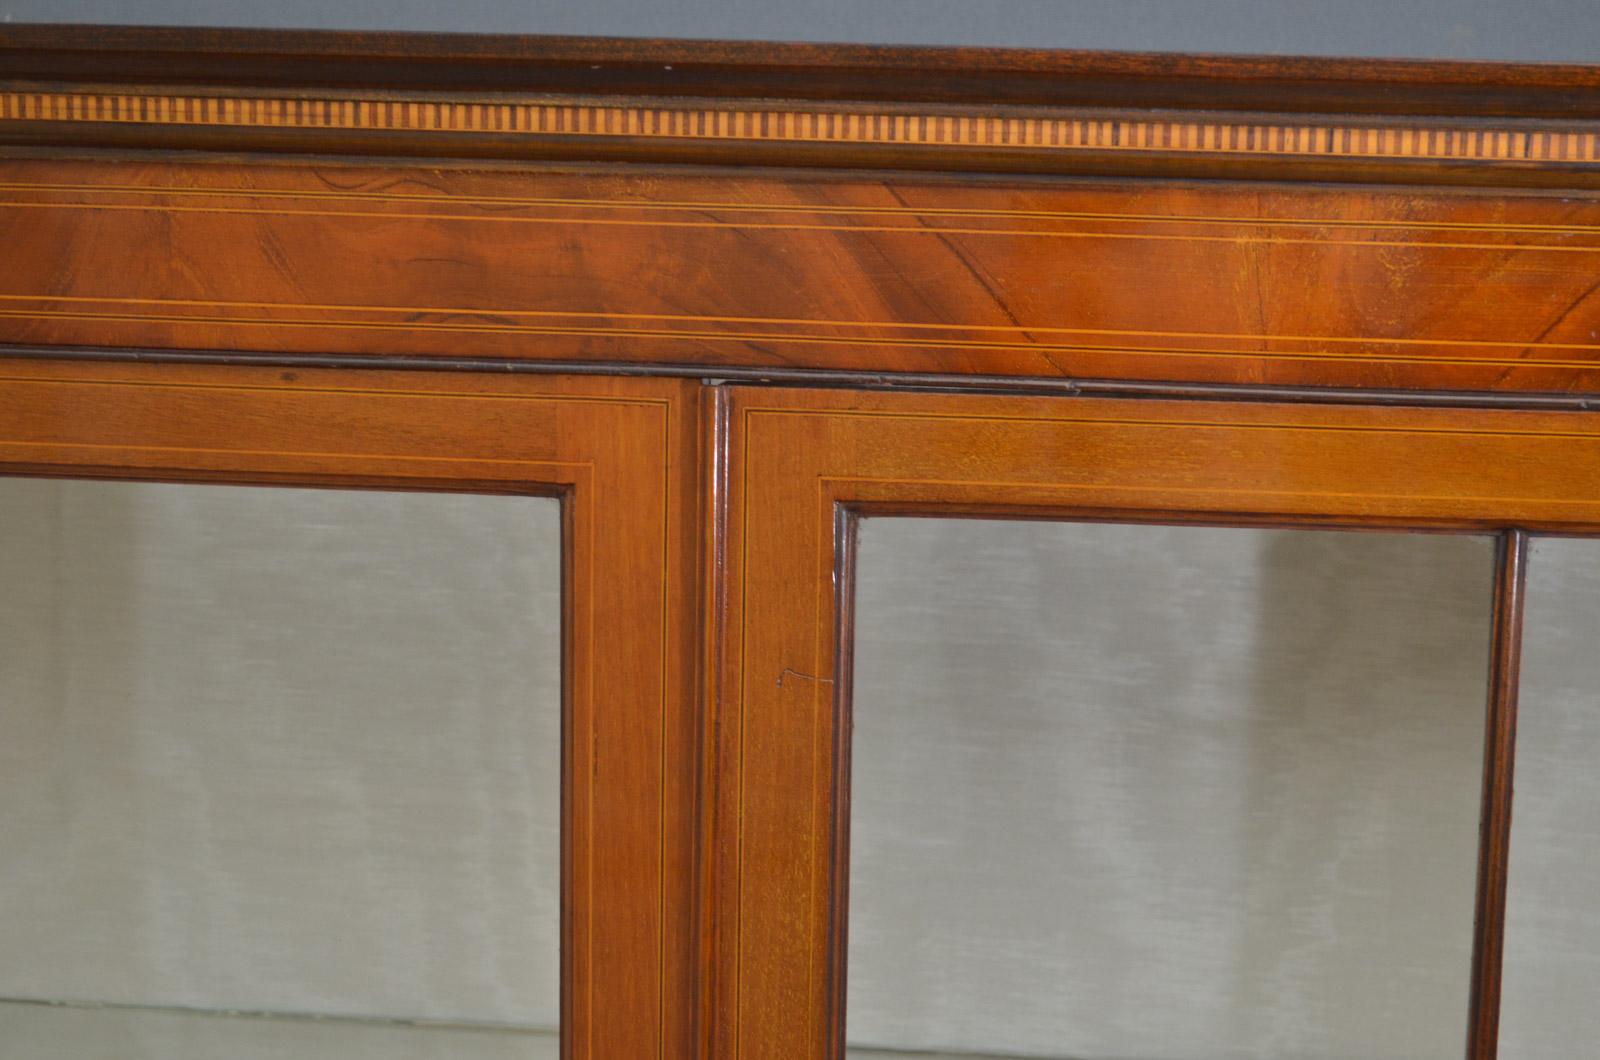 Sn4184, a tall and elegant Edwardian mahogany and inlaid display cabinet / china cabinet, having moulded cornice above satinwood dentil inlaid frieze a pair of satinwood inlaid doors fitted with original working lock and enclosing relined interior